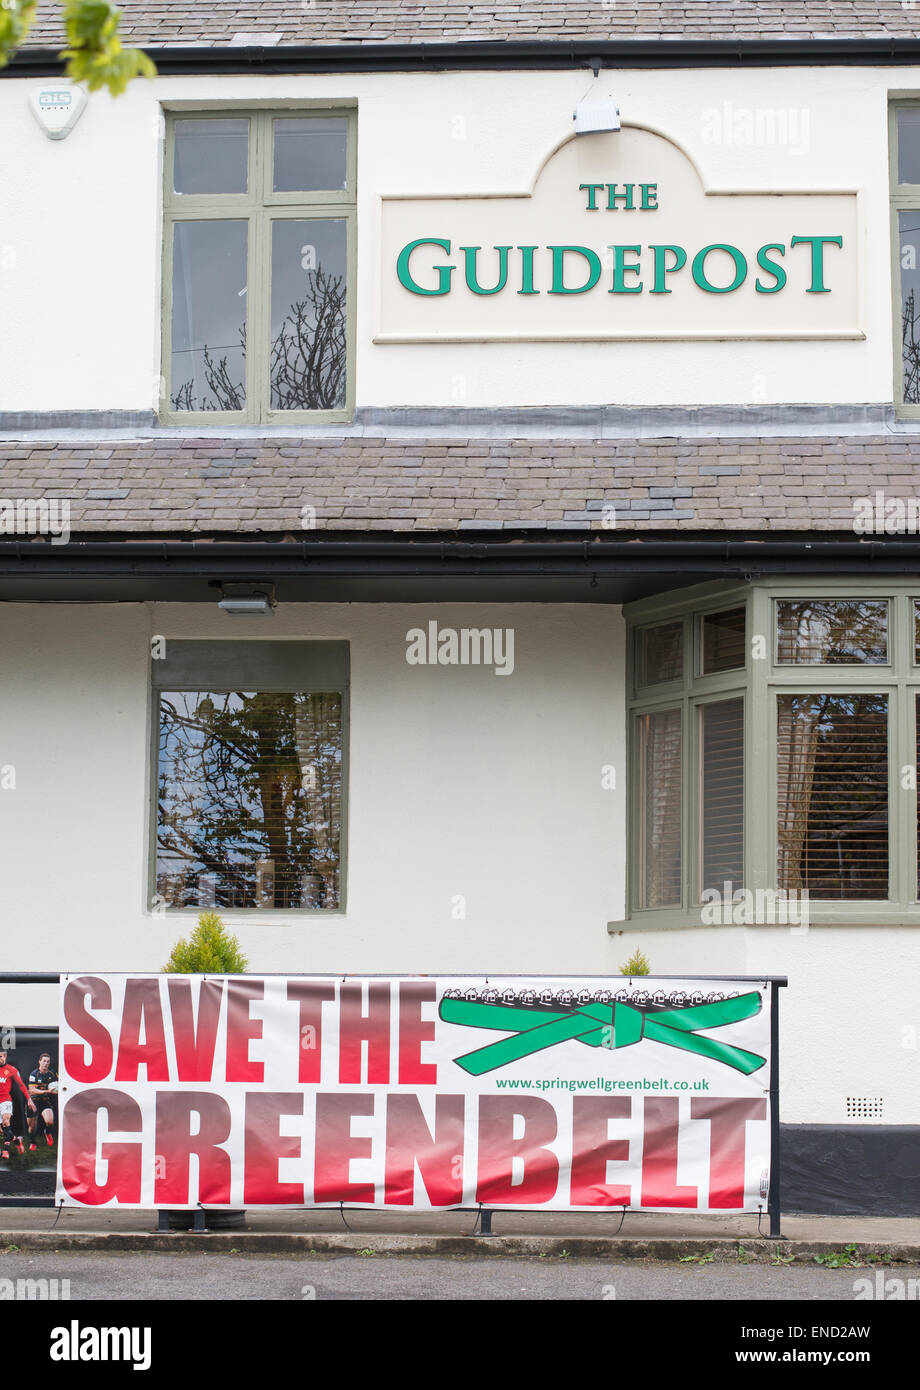 Save the Greenbelt sign outside pub, Springwell Village, north east England UK Stock Photo